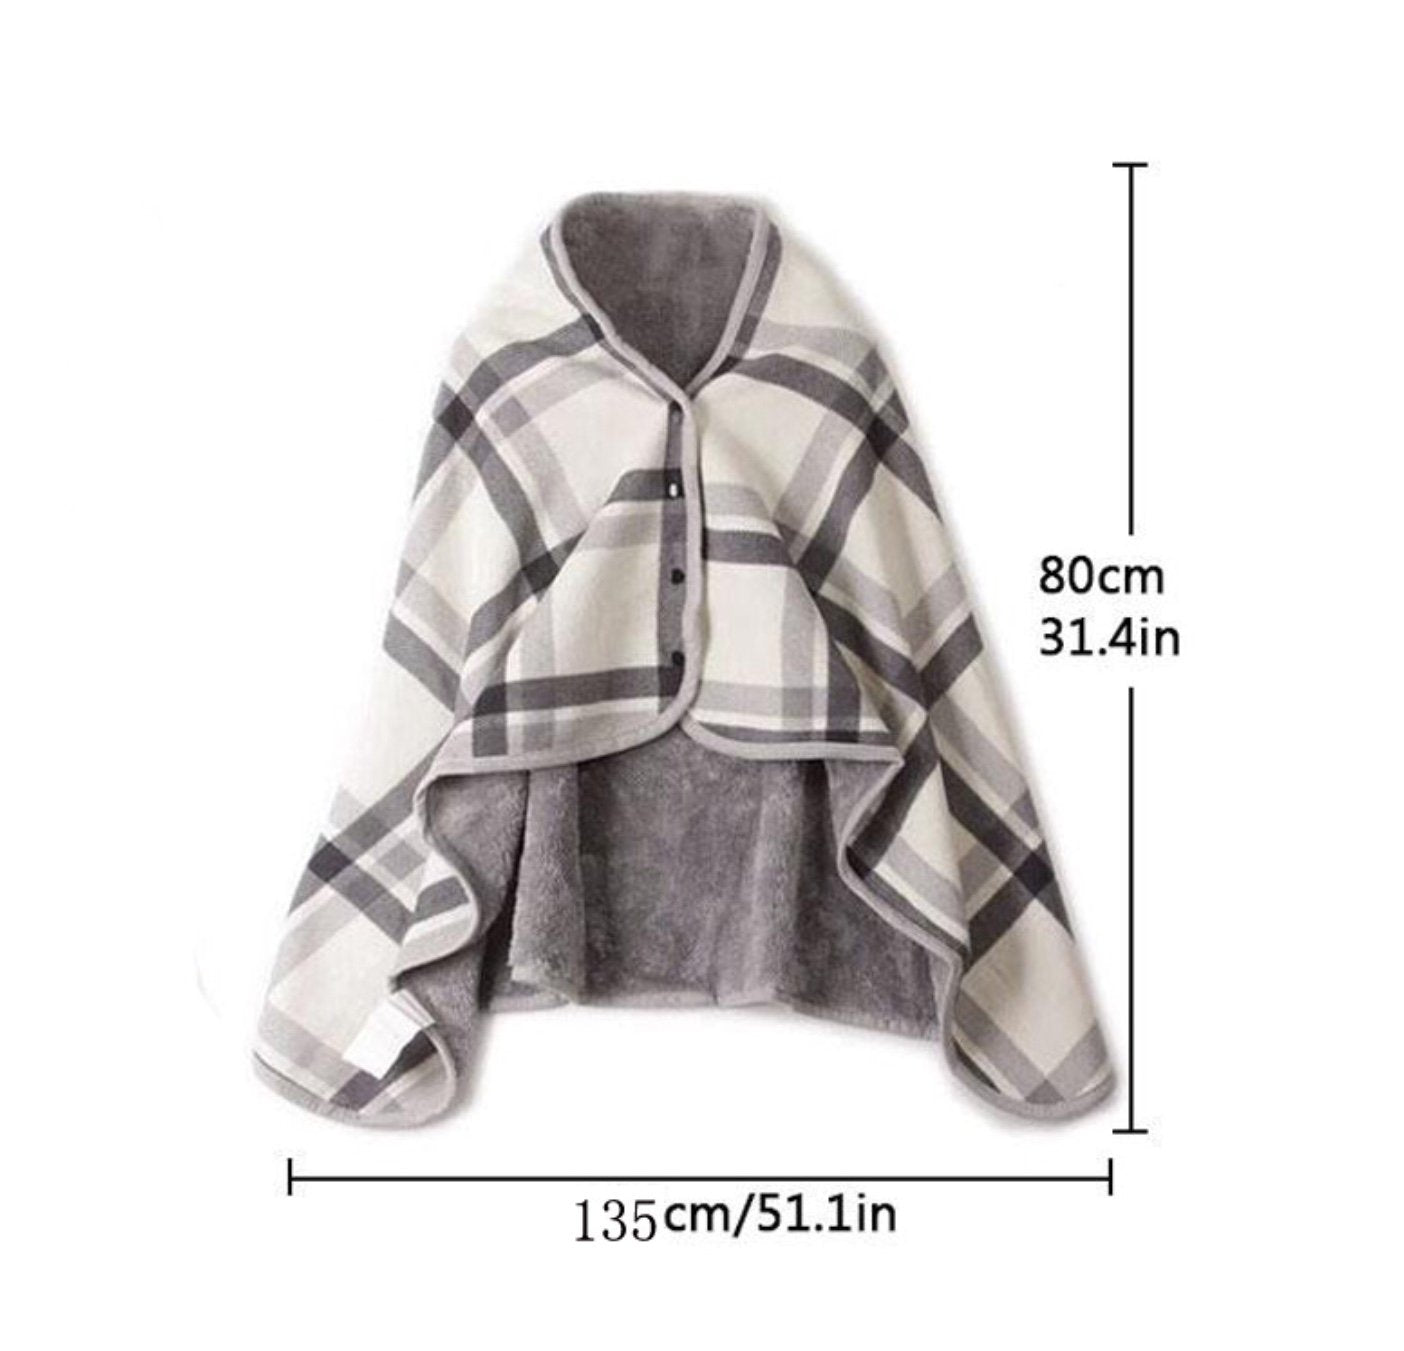 Poncho fleece warm plaid pashmina carmel Color and off white  great gift,next day shipping